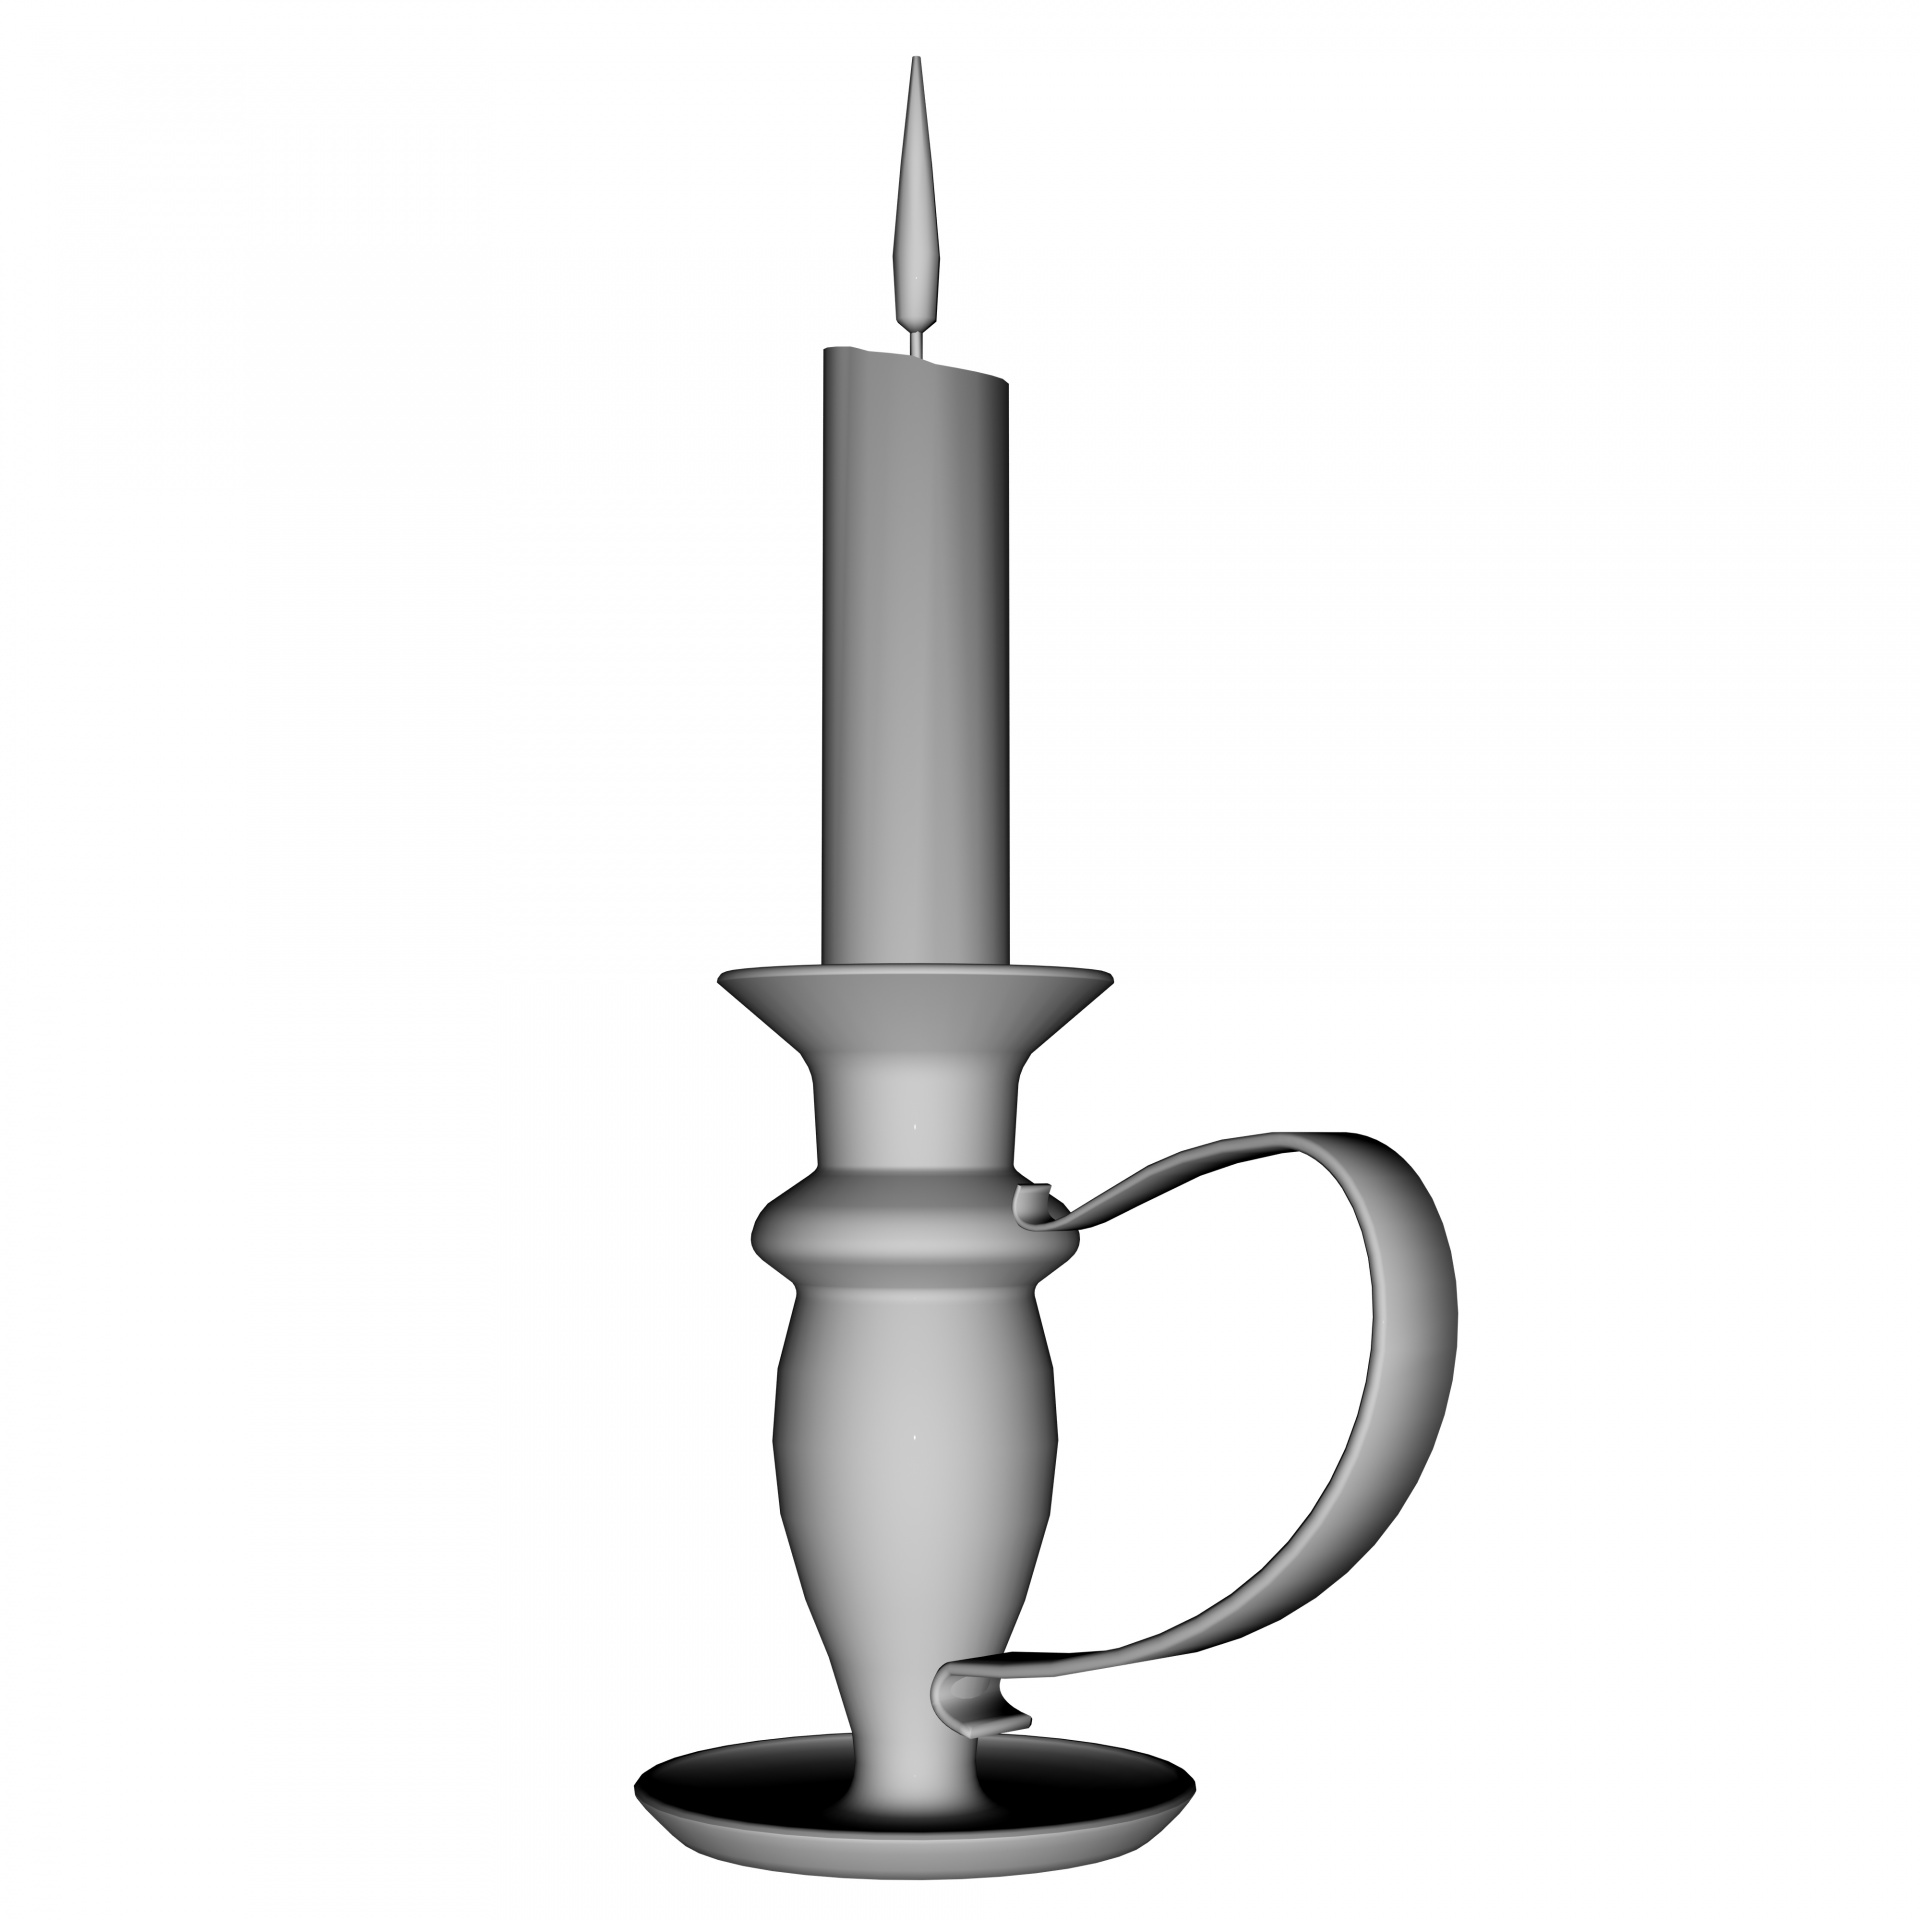 Drawing,candle,handle,burning,flame - free image from